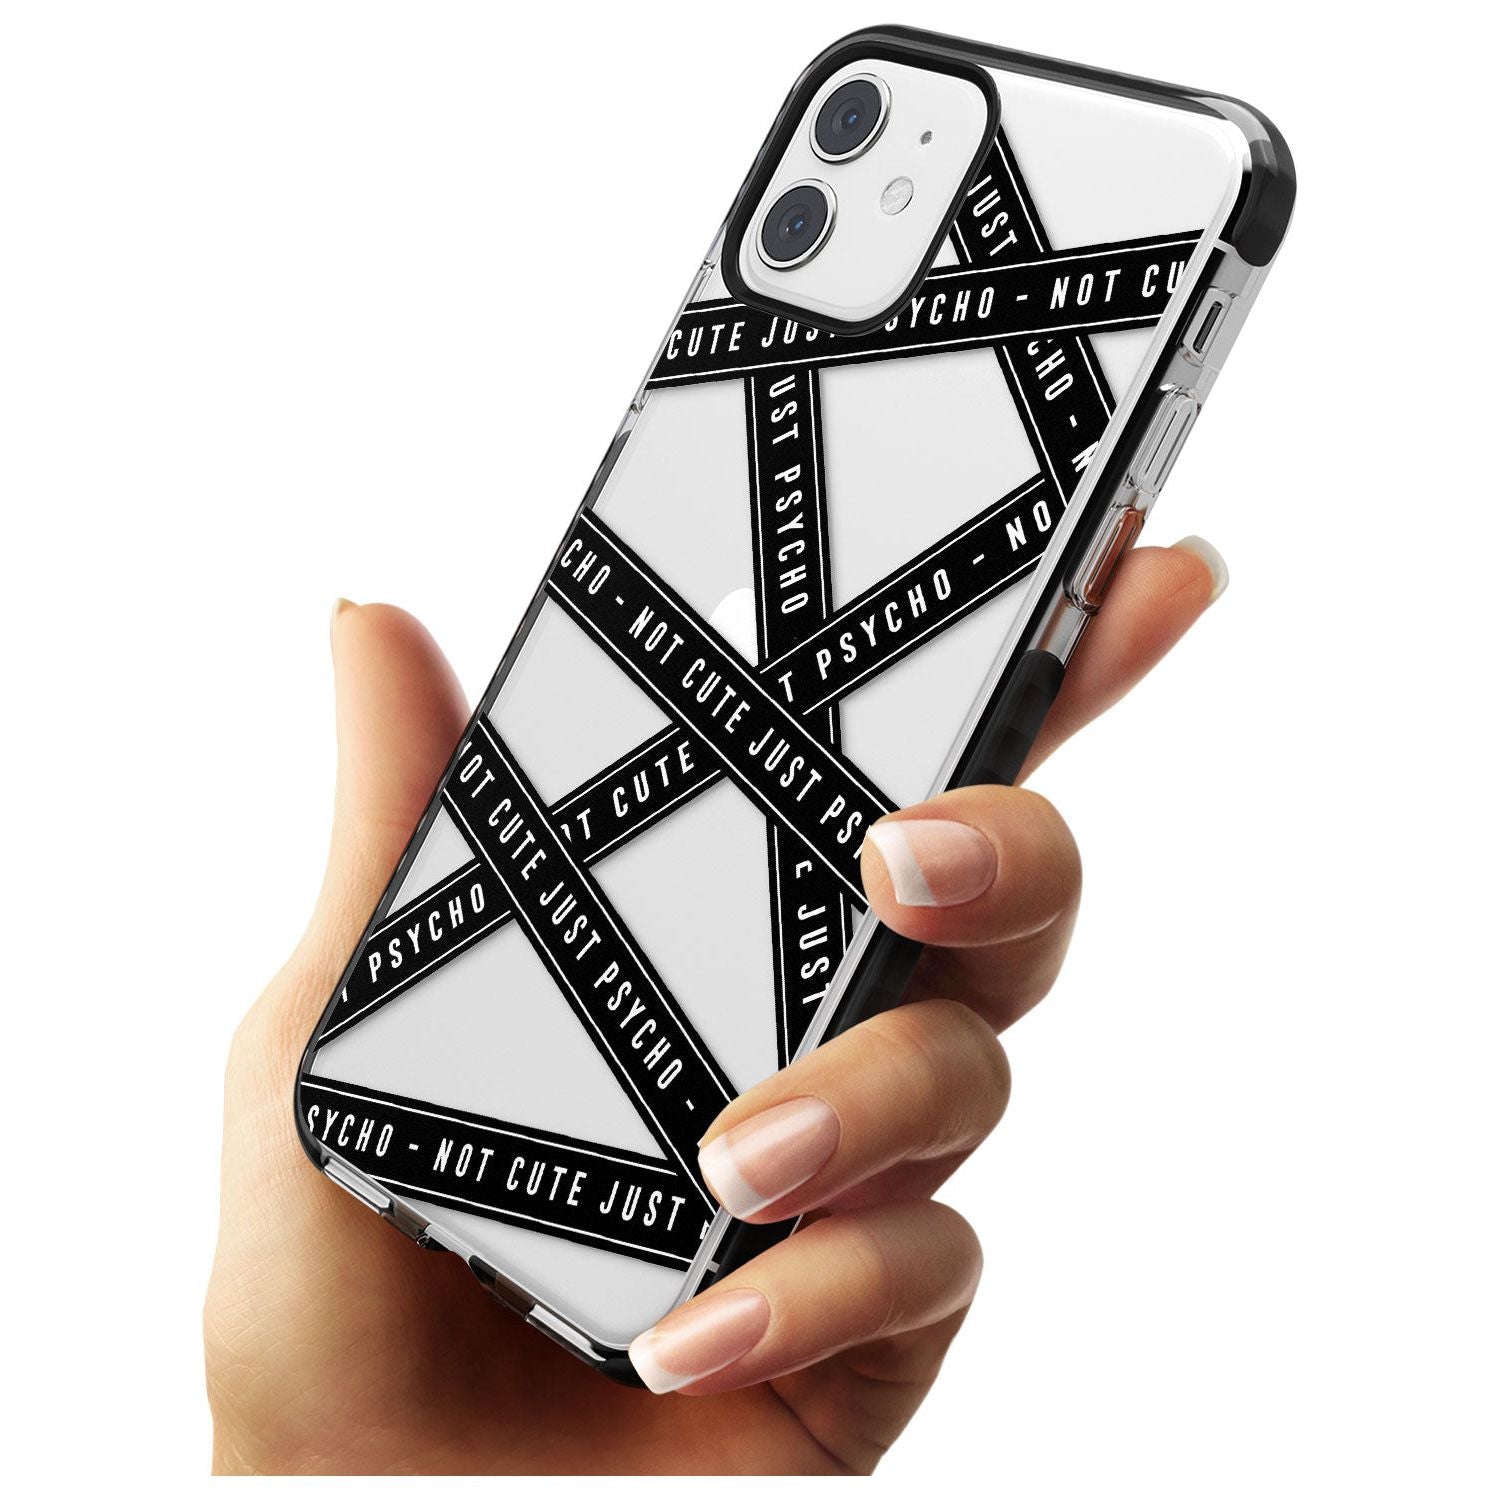 Caution Tape (Clear) Not Cute Just Psycho Black Impact Phone Case for iPhone 11